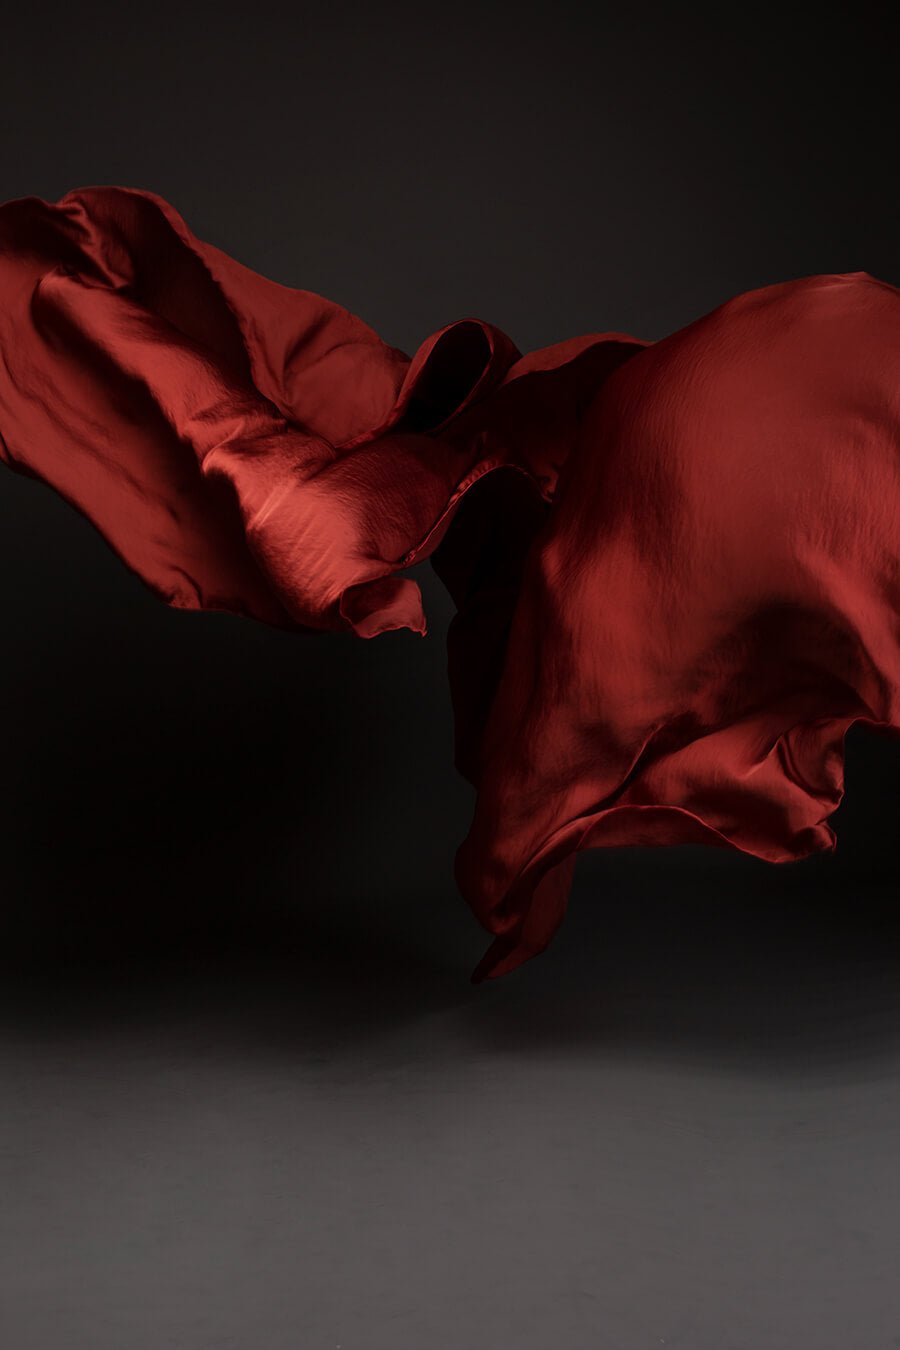 Photo taken on a studio and shows only the mii-estilo silky scarf in rust orange color. The photo shows the scarf flying in front of the camera with playful movements.